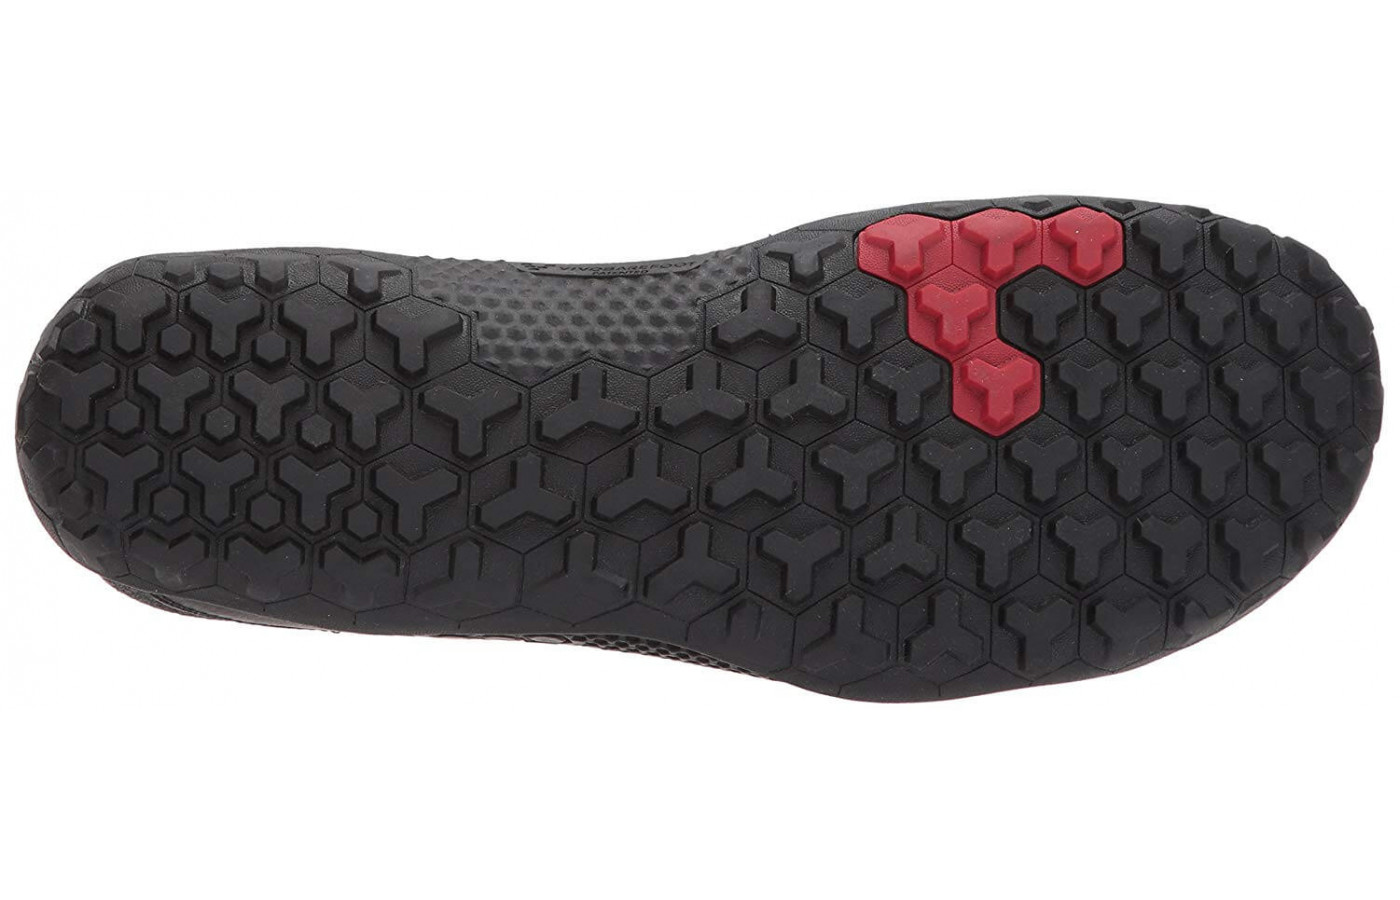 A Firm Ground outsole provides the Primus Trek with incredible traction